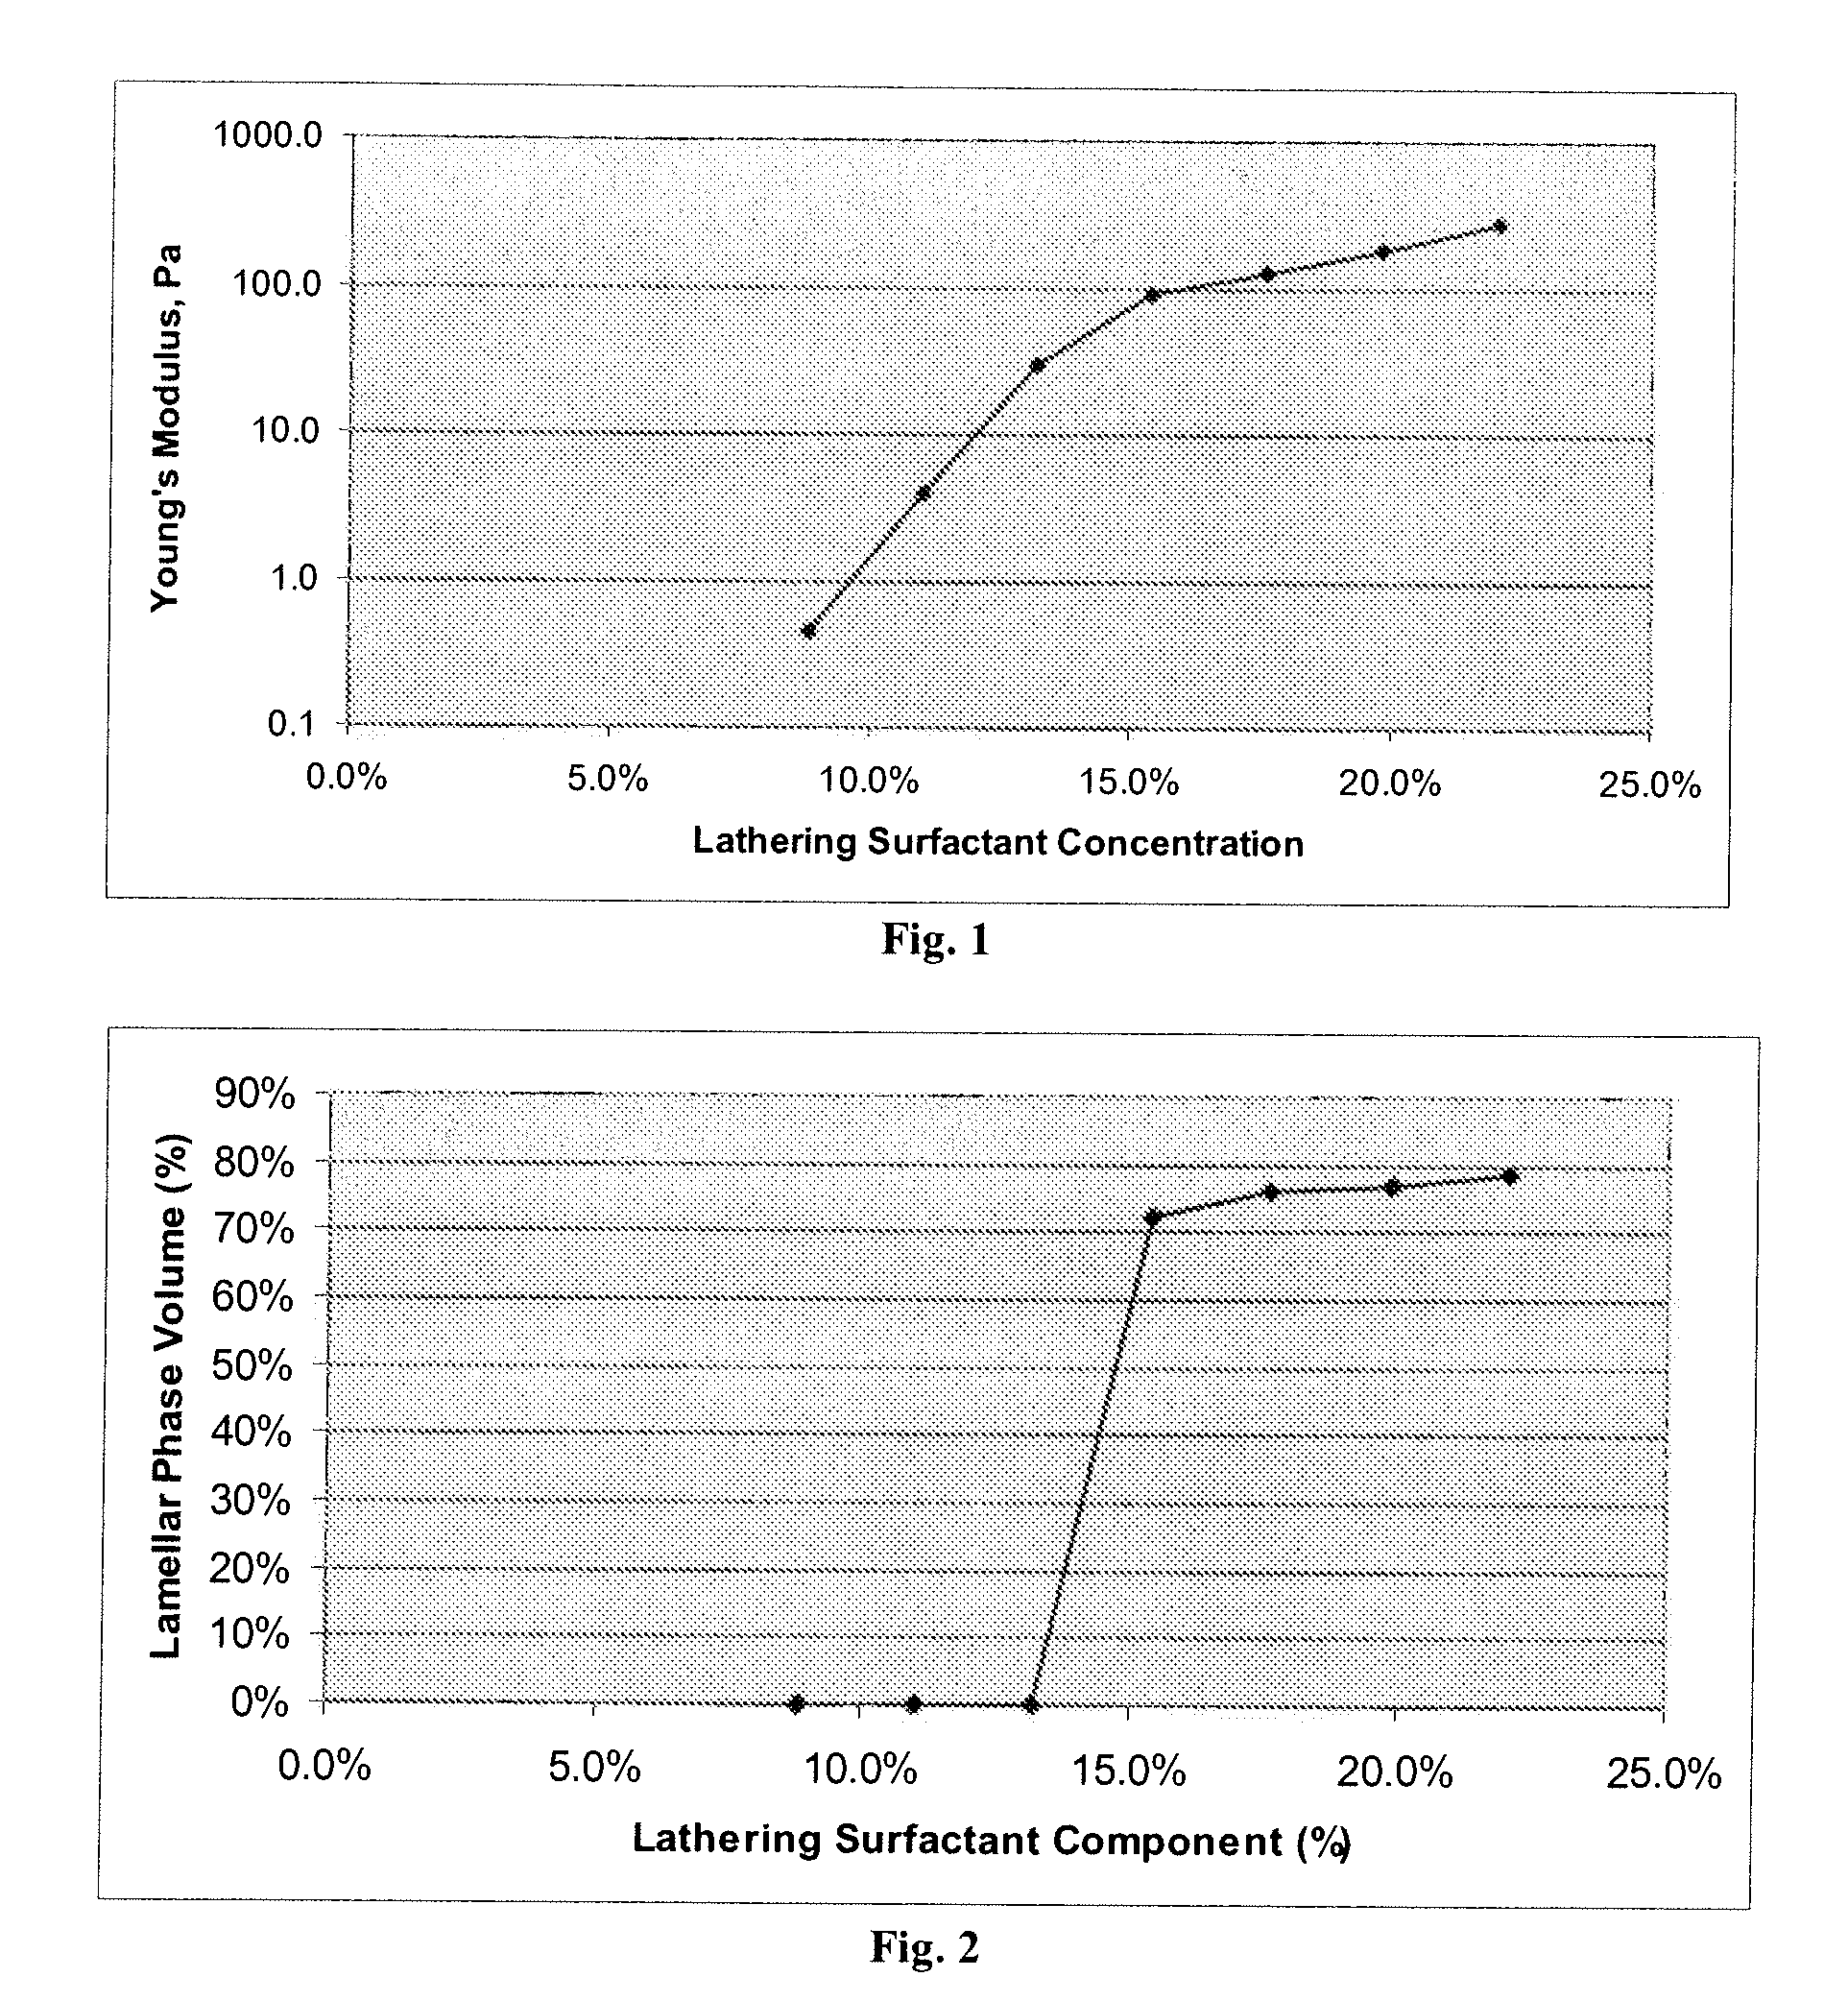 Multiphase personal care composition comprising a structuring system that comprises an associative polymer, a low hlb emulsifier and an electrolyte